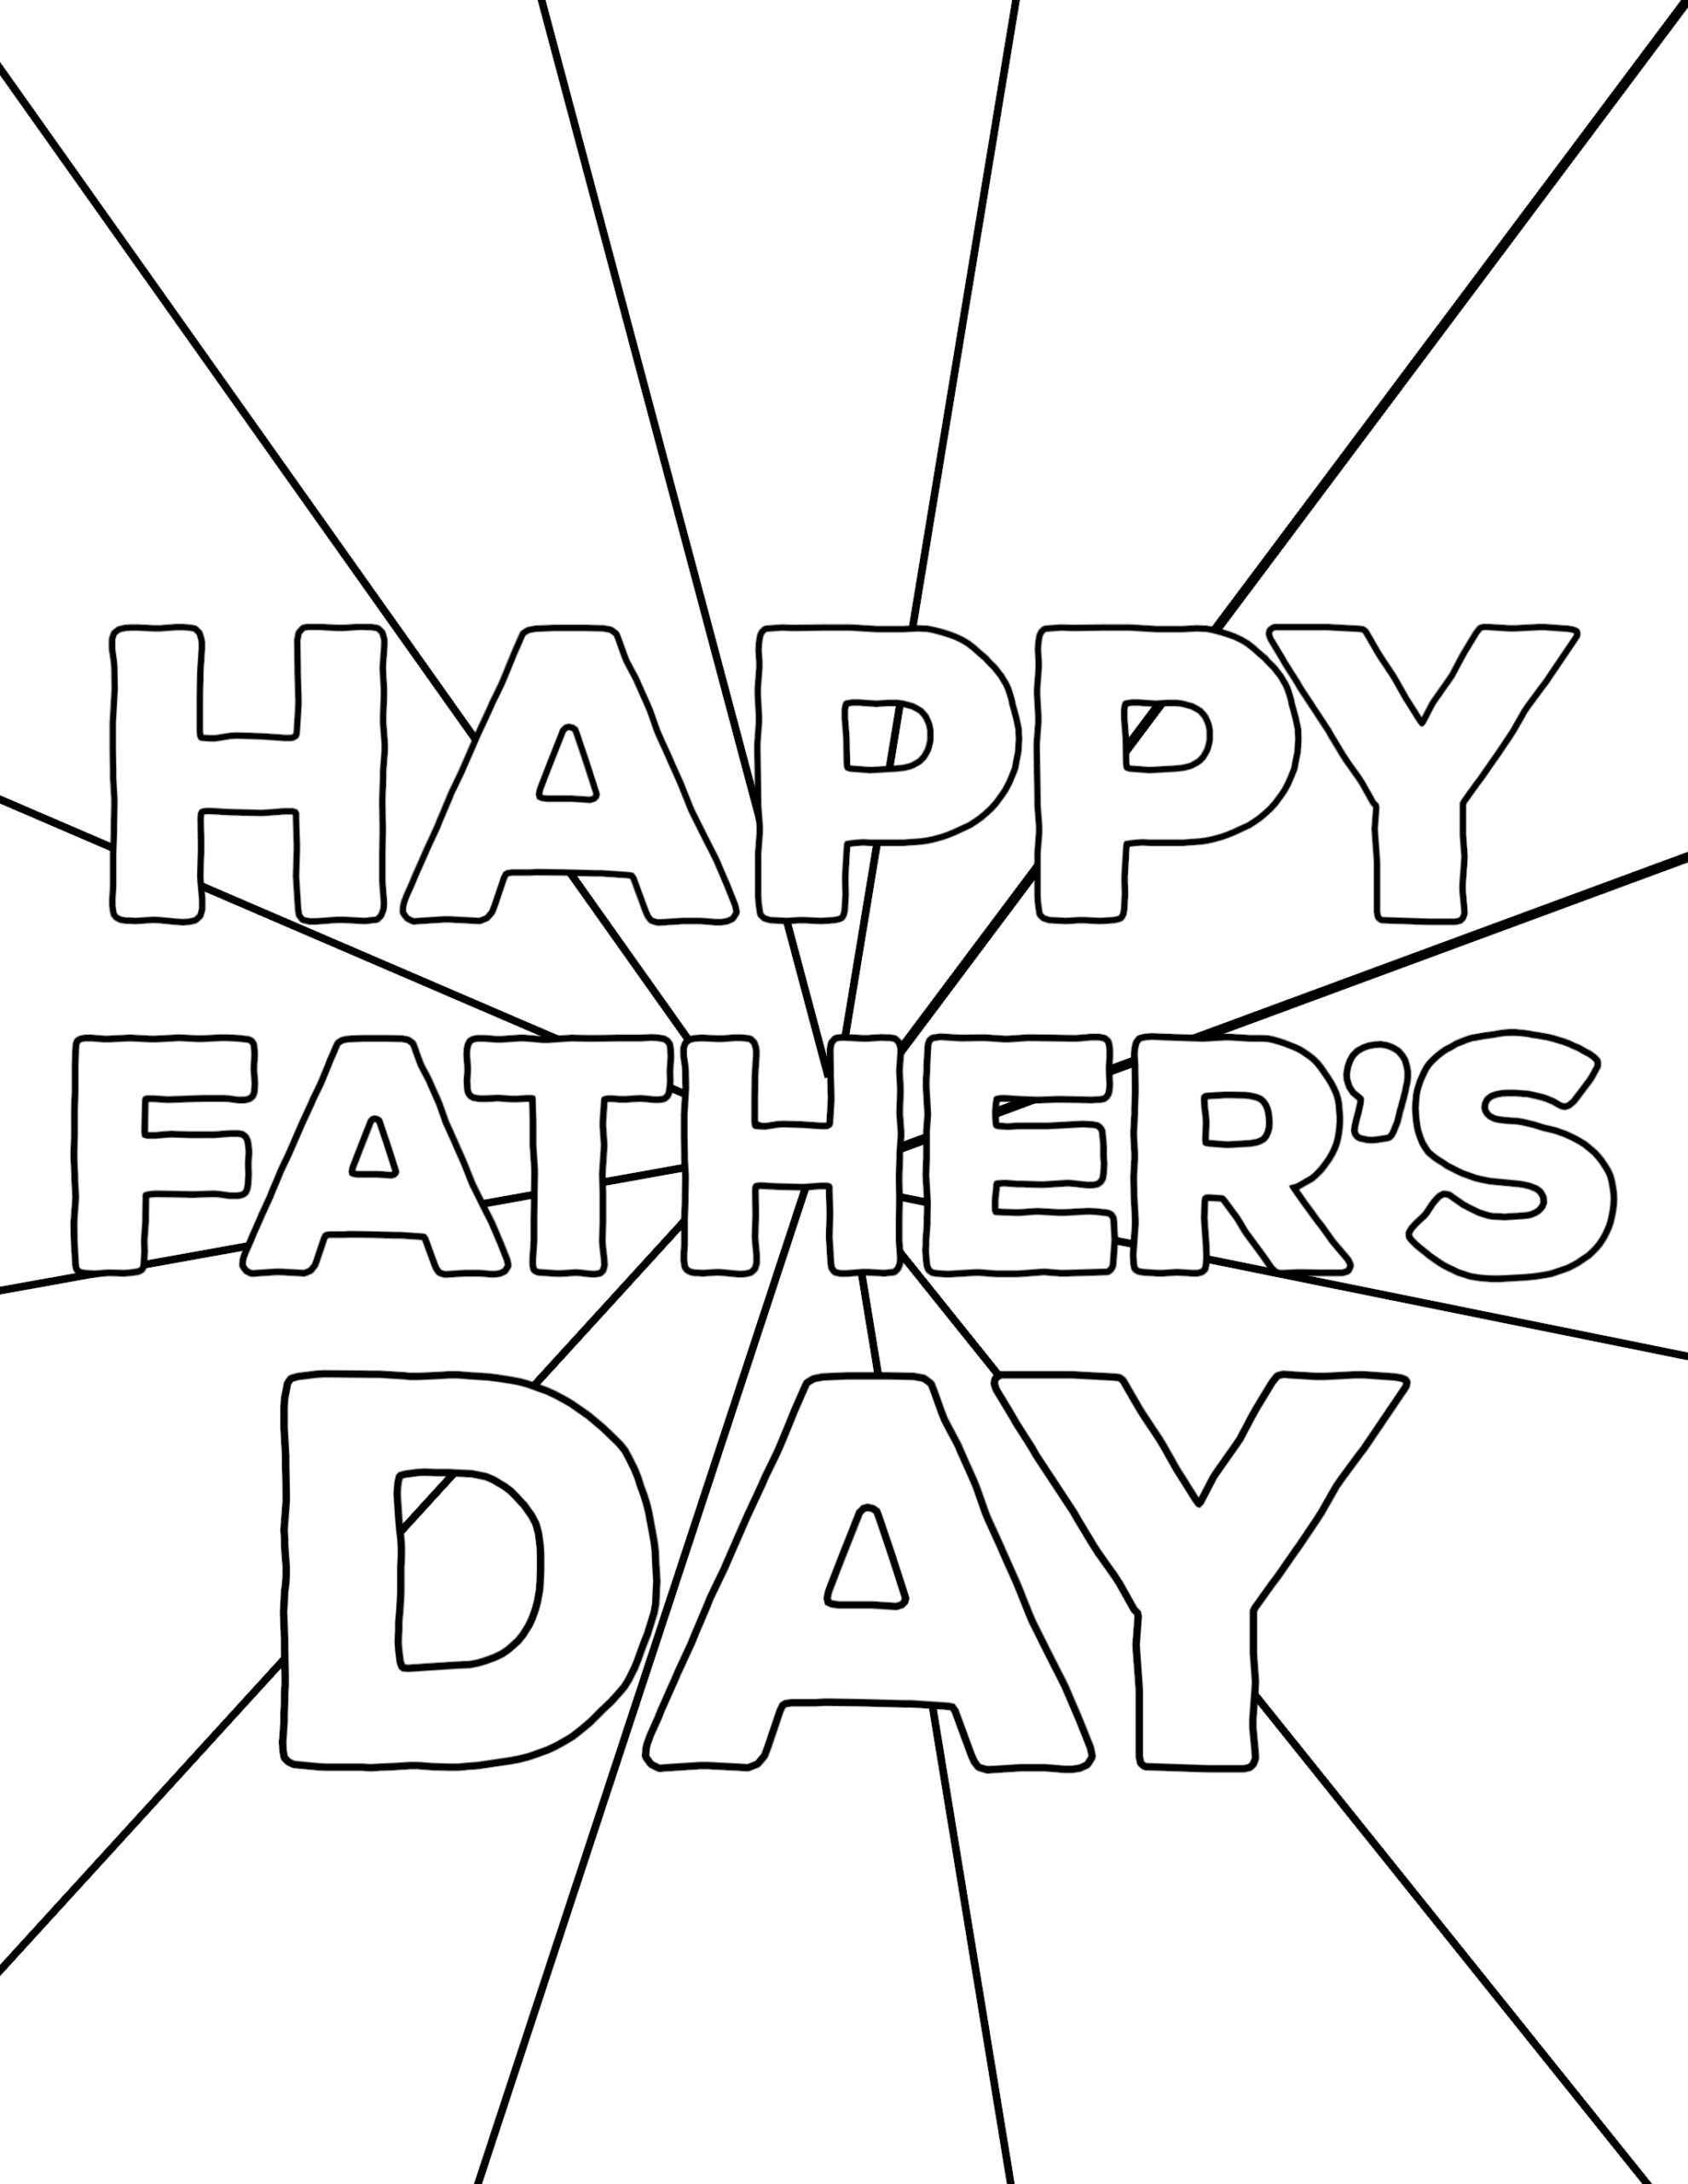 Happy fathers day coloring pages free printables